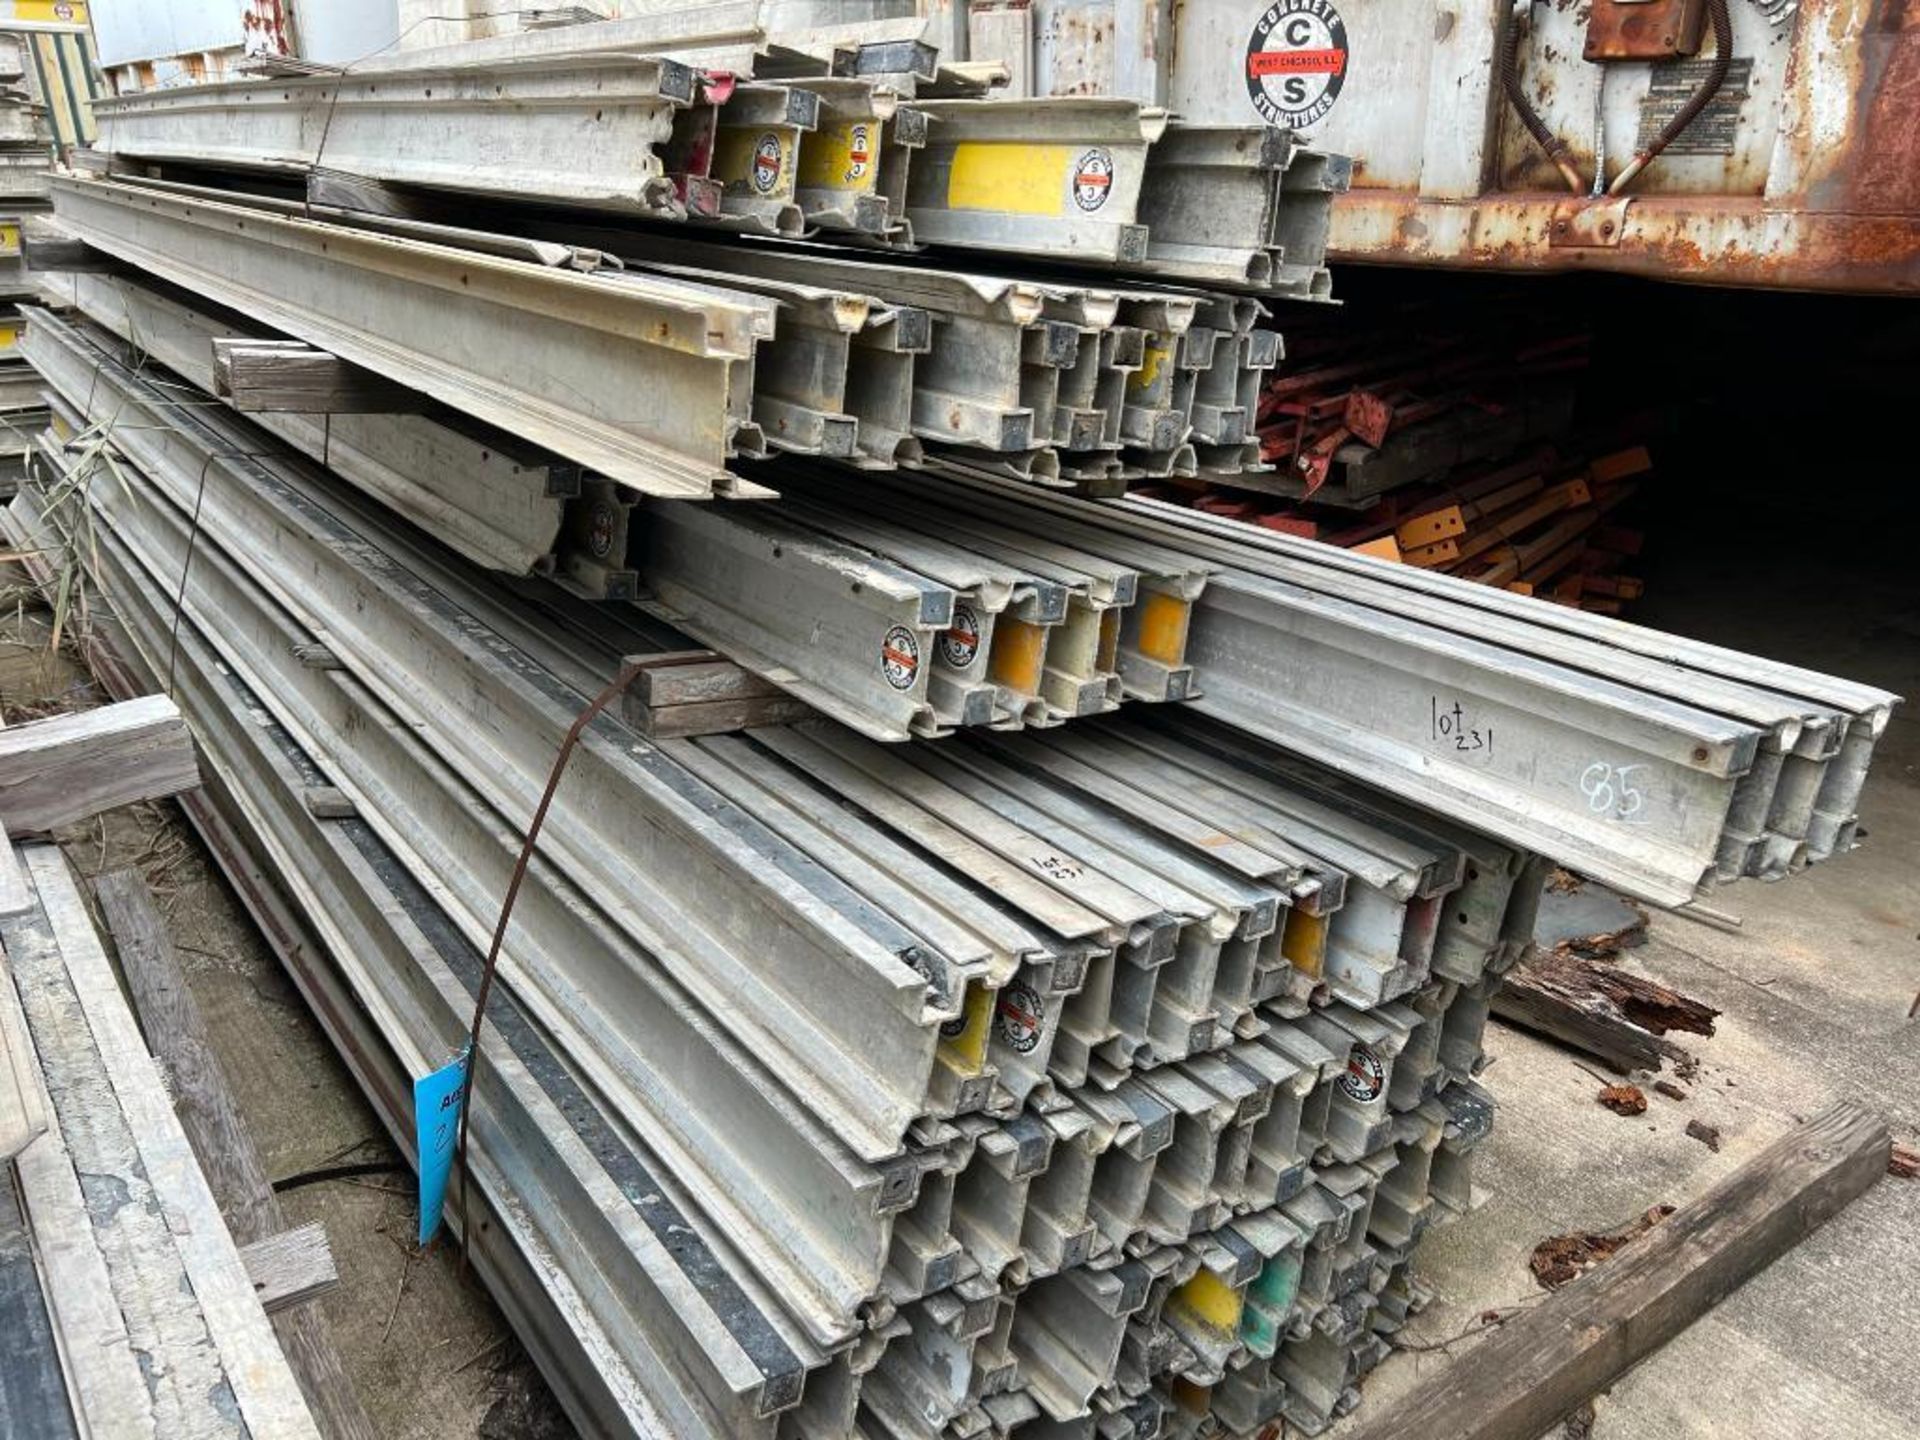 LOT: Approx. (85) 6 1/2" Symons Joists, 21' and Under